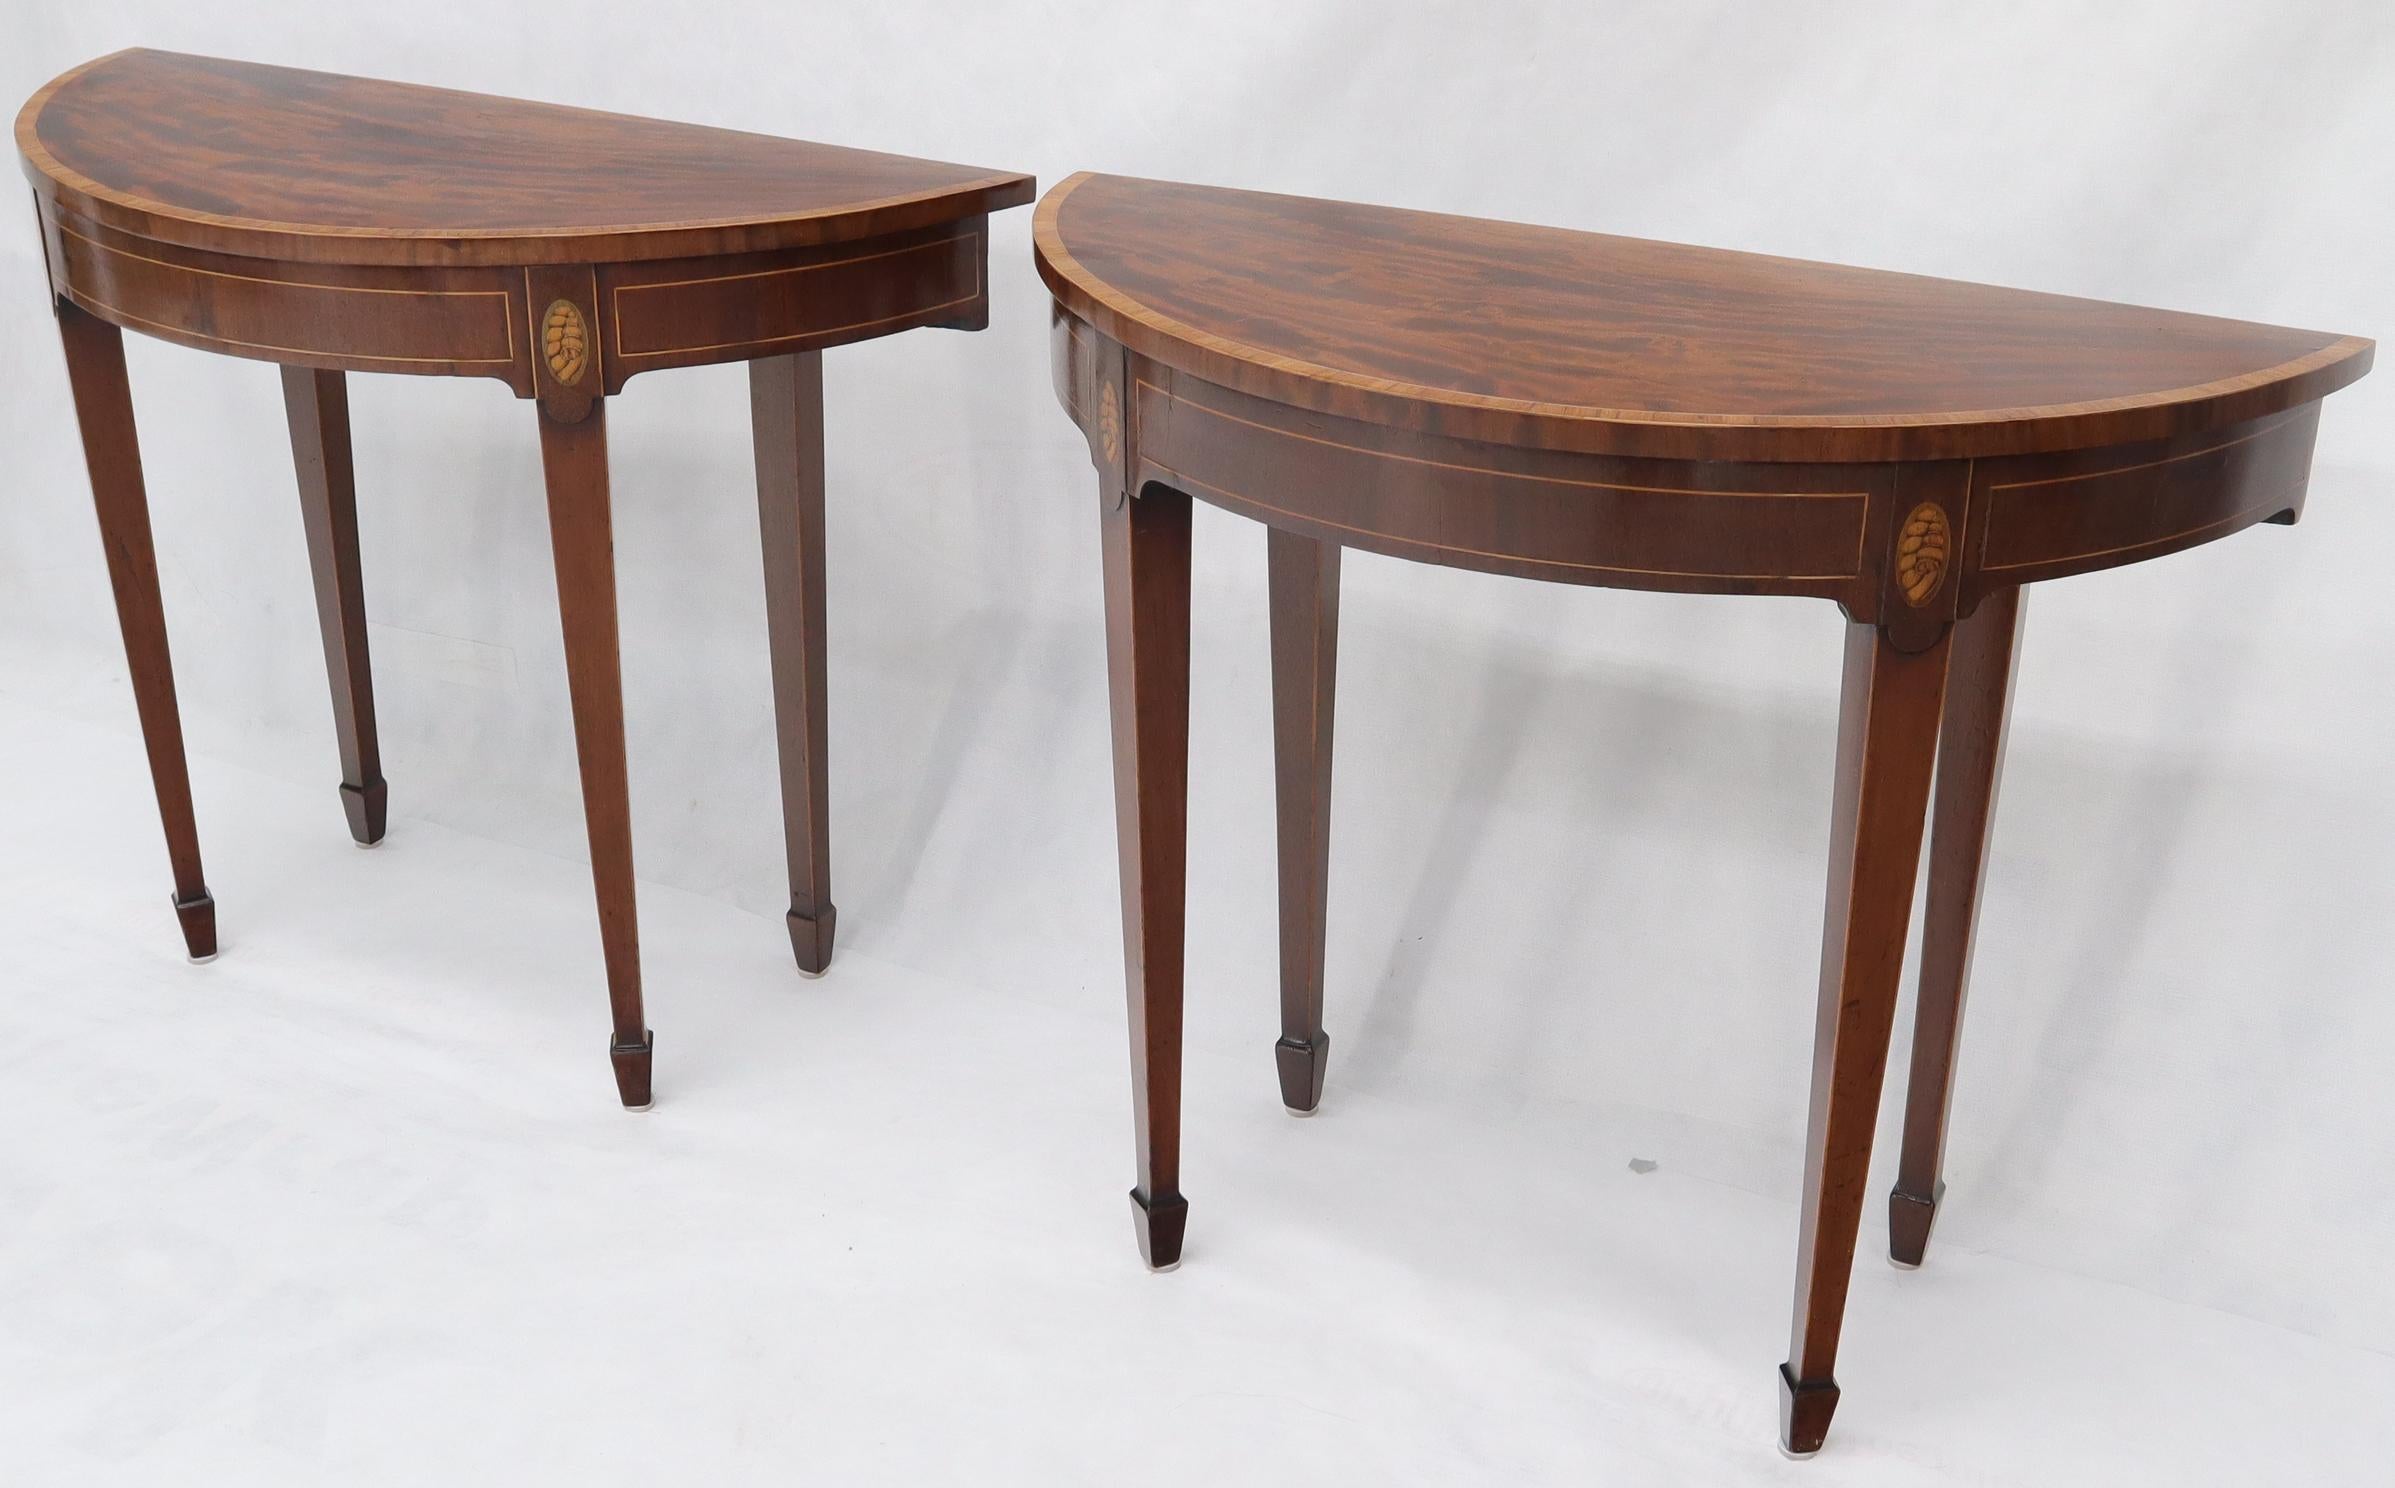 American Pair of Old Flame Mahogany Hepplewhite Style Inlaid Demilune Console Tables